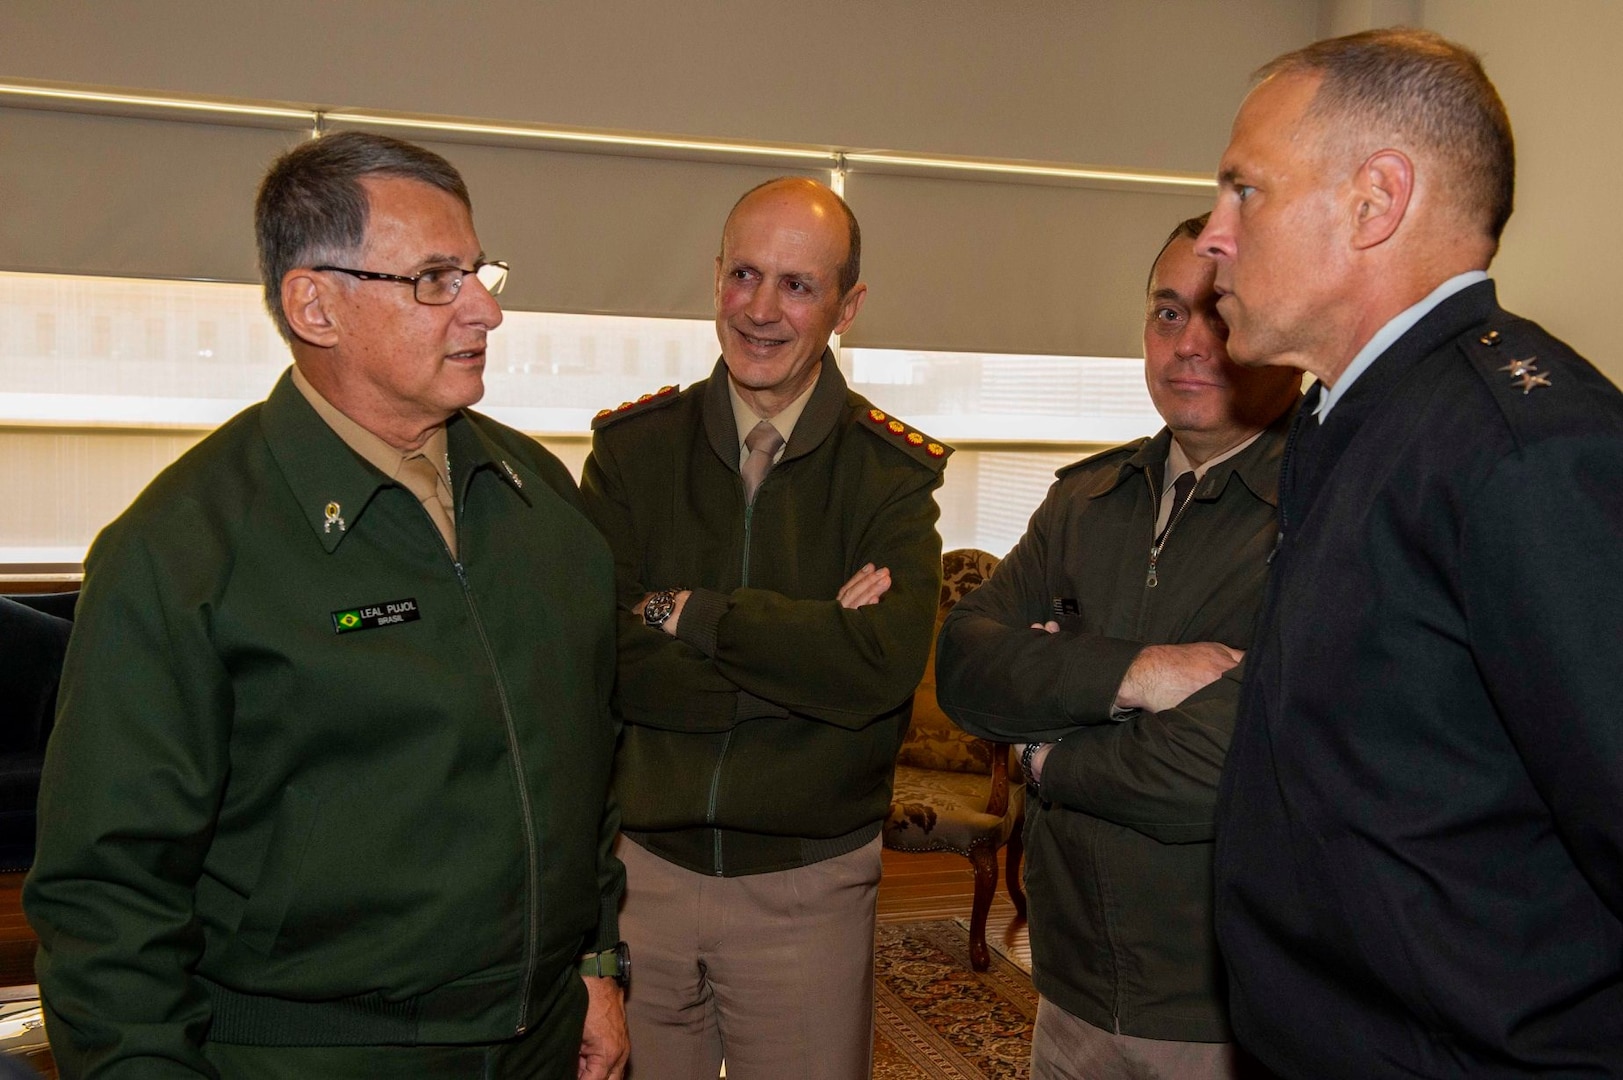 Maj. Gen. Daniel Walrath (right), U.S. Army South commanding general, visits with Gen. Edson Leal Pujol (left), Brazilian Army commander, and his delegation, in Santiago, Chile, Sept. 17. Walrath traveled to Santiago where he joined other partner nation army leaders to celebrate Chile’s Independence Day and The Day of the Glories of the Chilean Army.